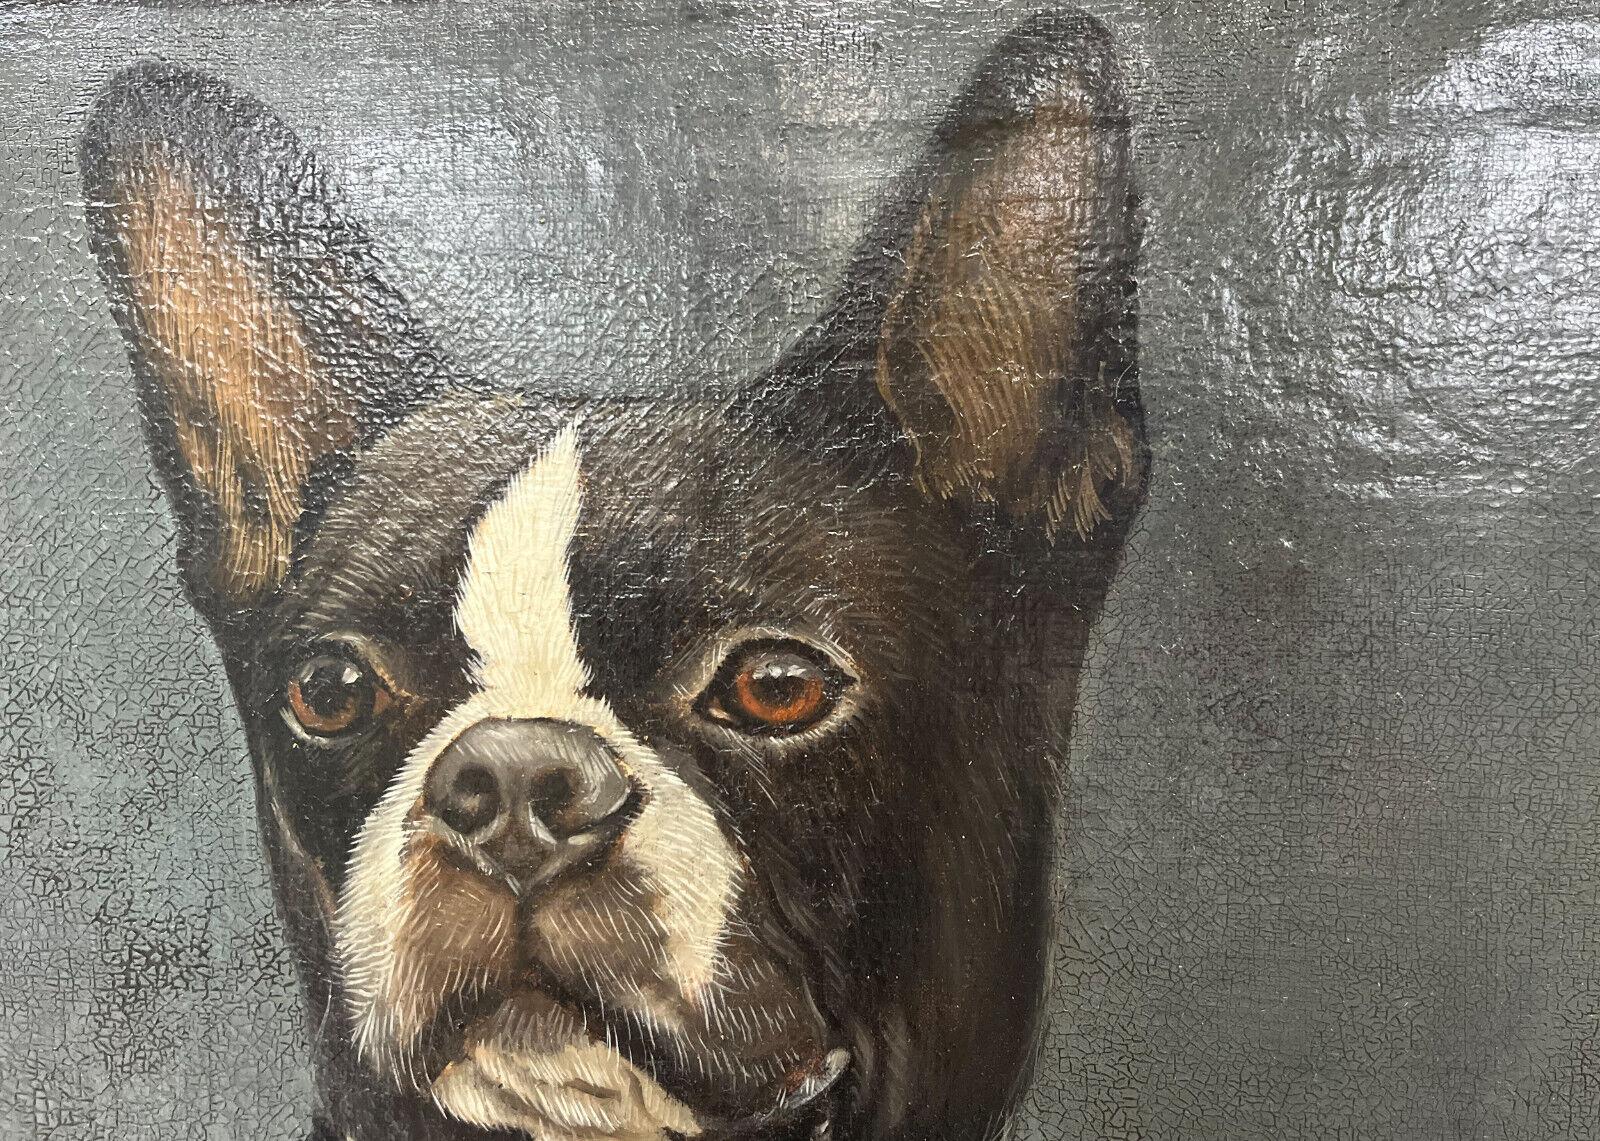 20th Century Thierry Poncelet Anthropomorphic Portrait of a Boston Terrier Dog Oil on Canvas